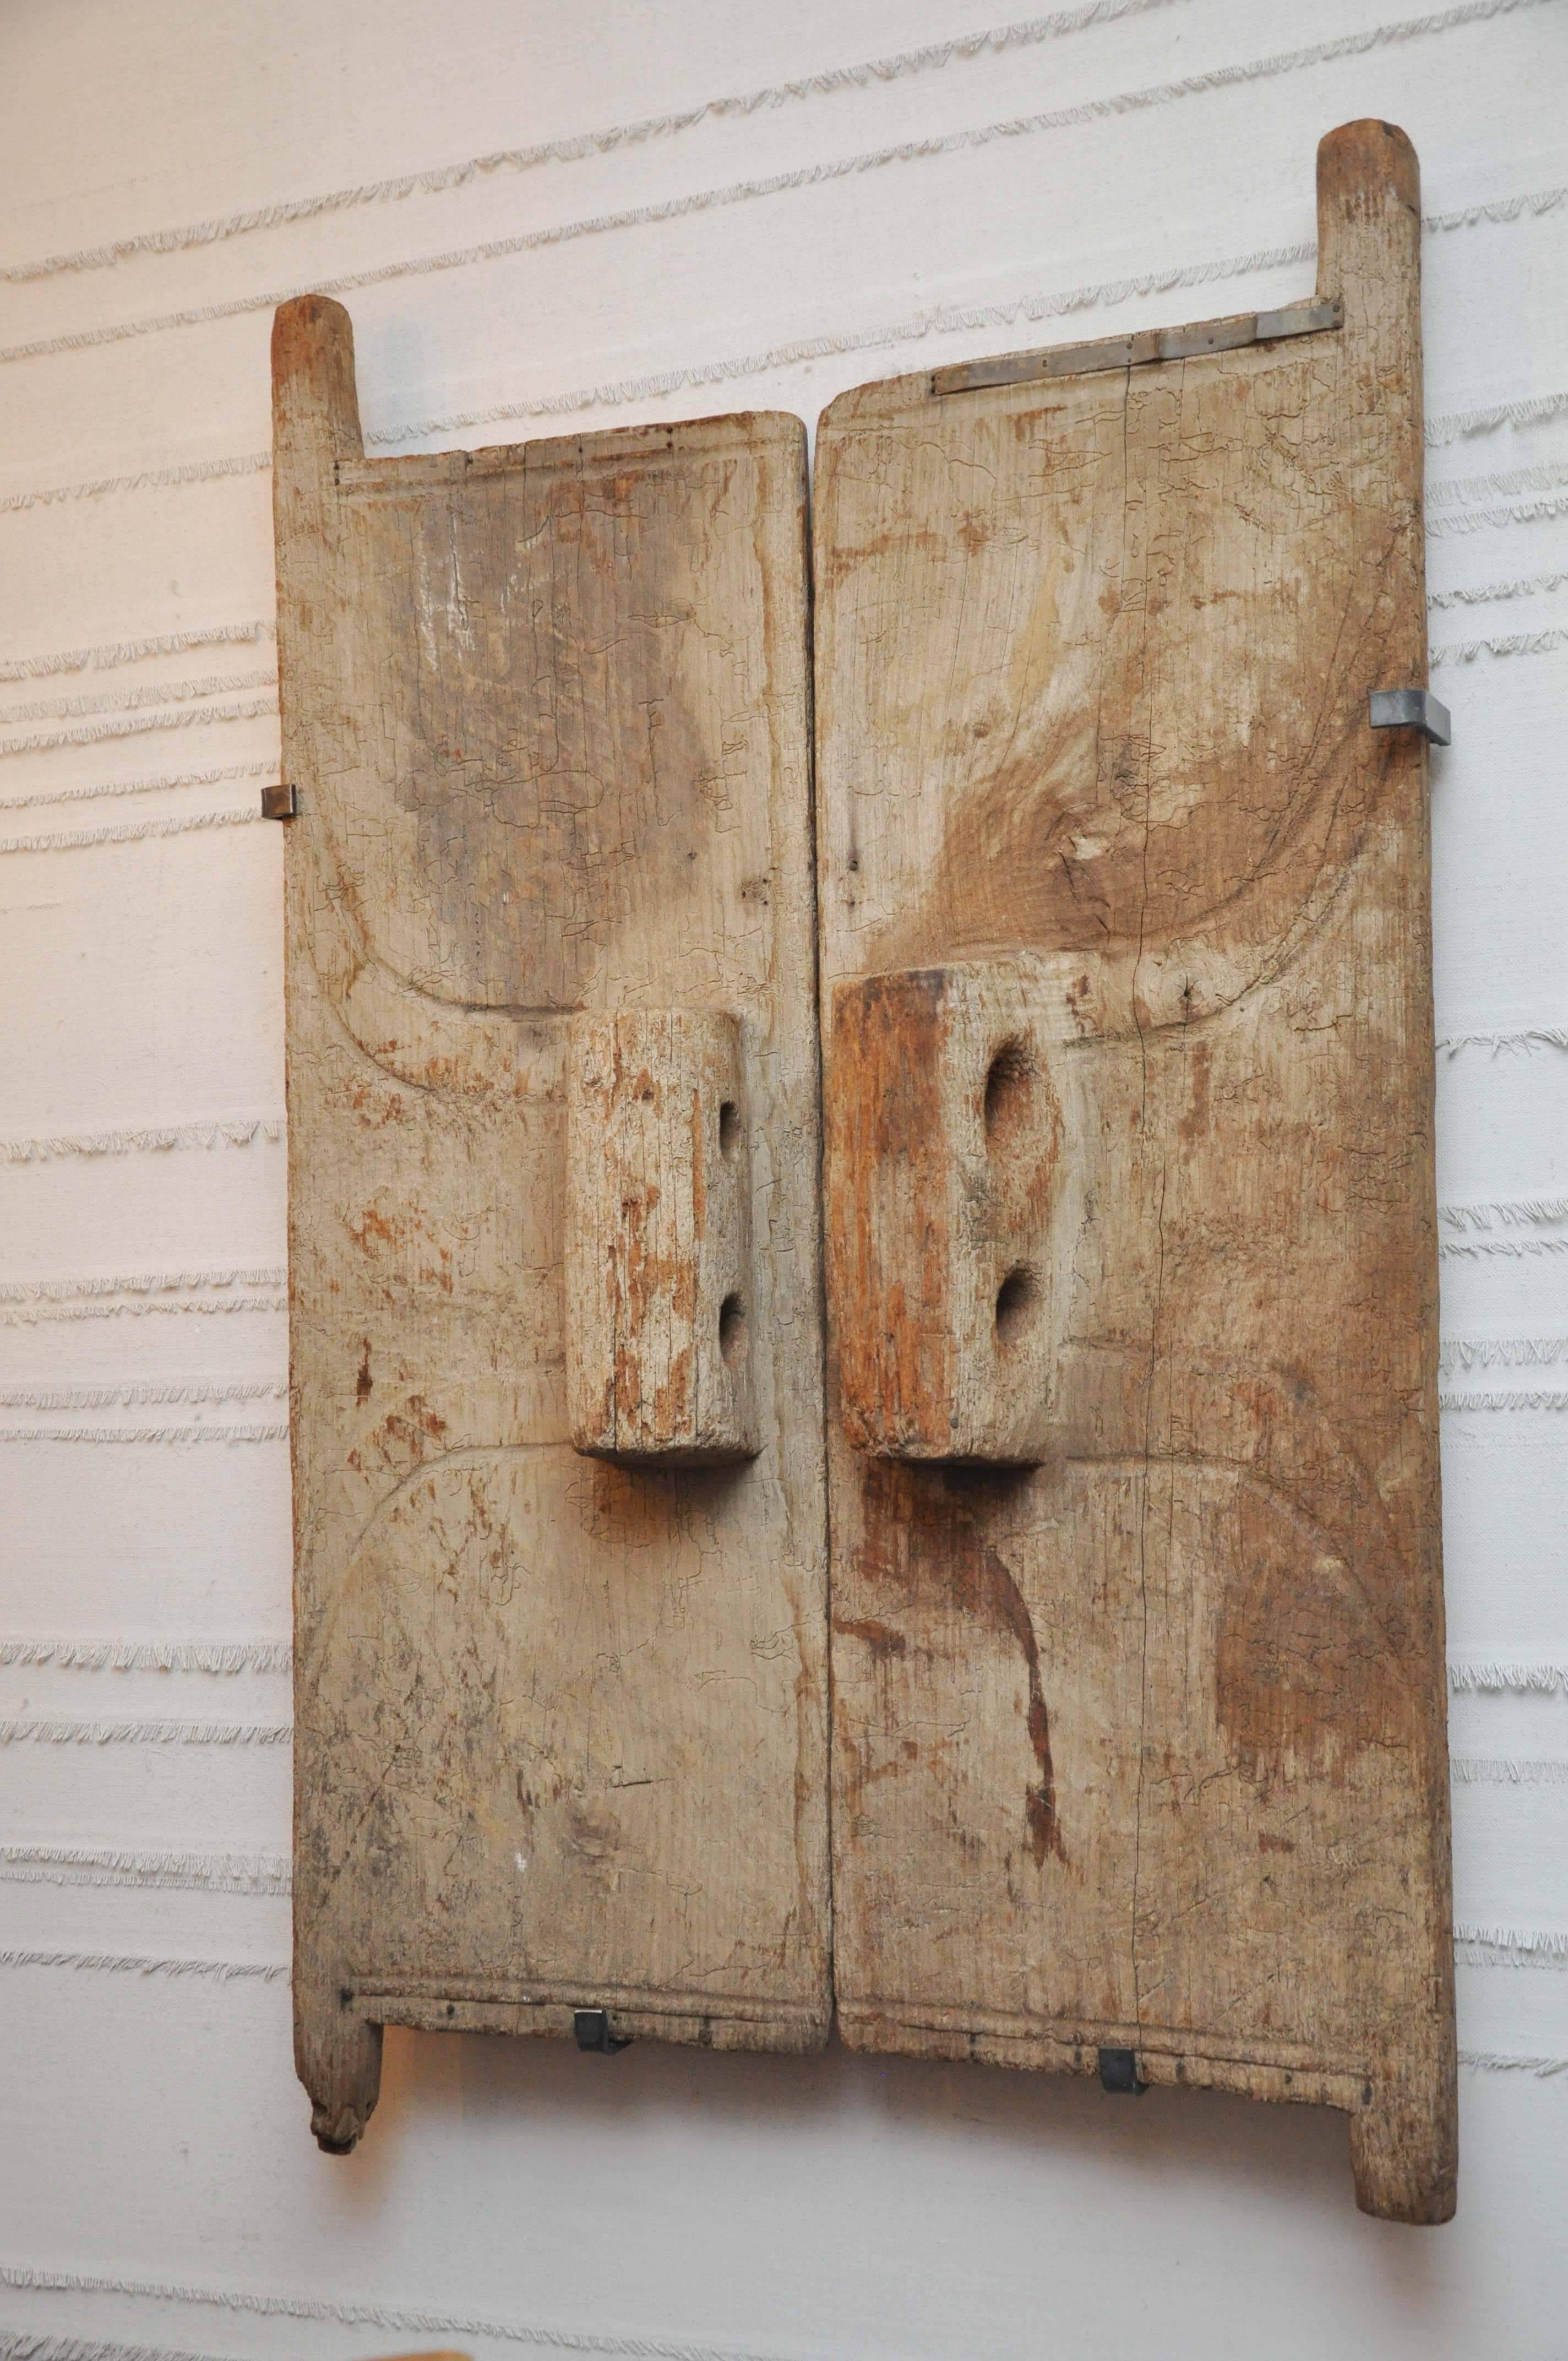 18th century Naga Granary Doors. These handsome and hefty granary doors were found in Nagaland. They were originally situated at the entrance to a granary. The buildings were short, hence the scale of the doors. 

the hanging apparatus is not